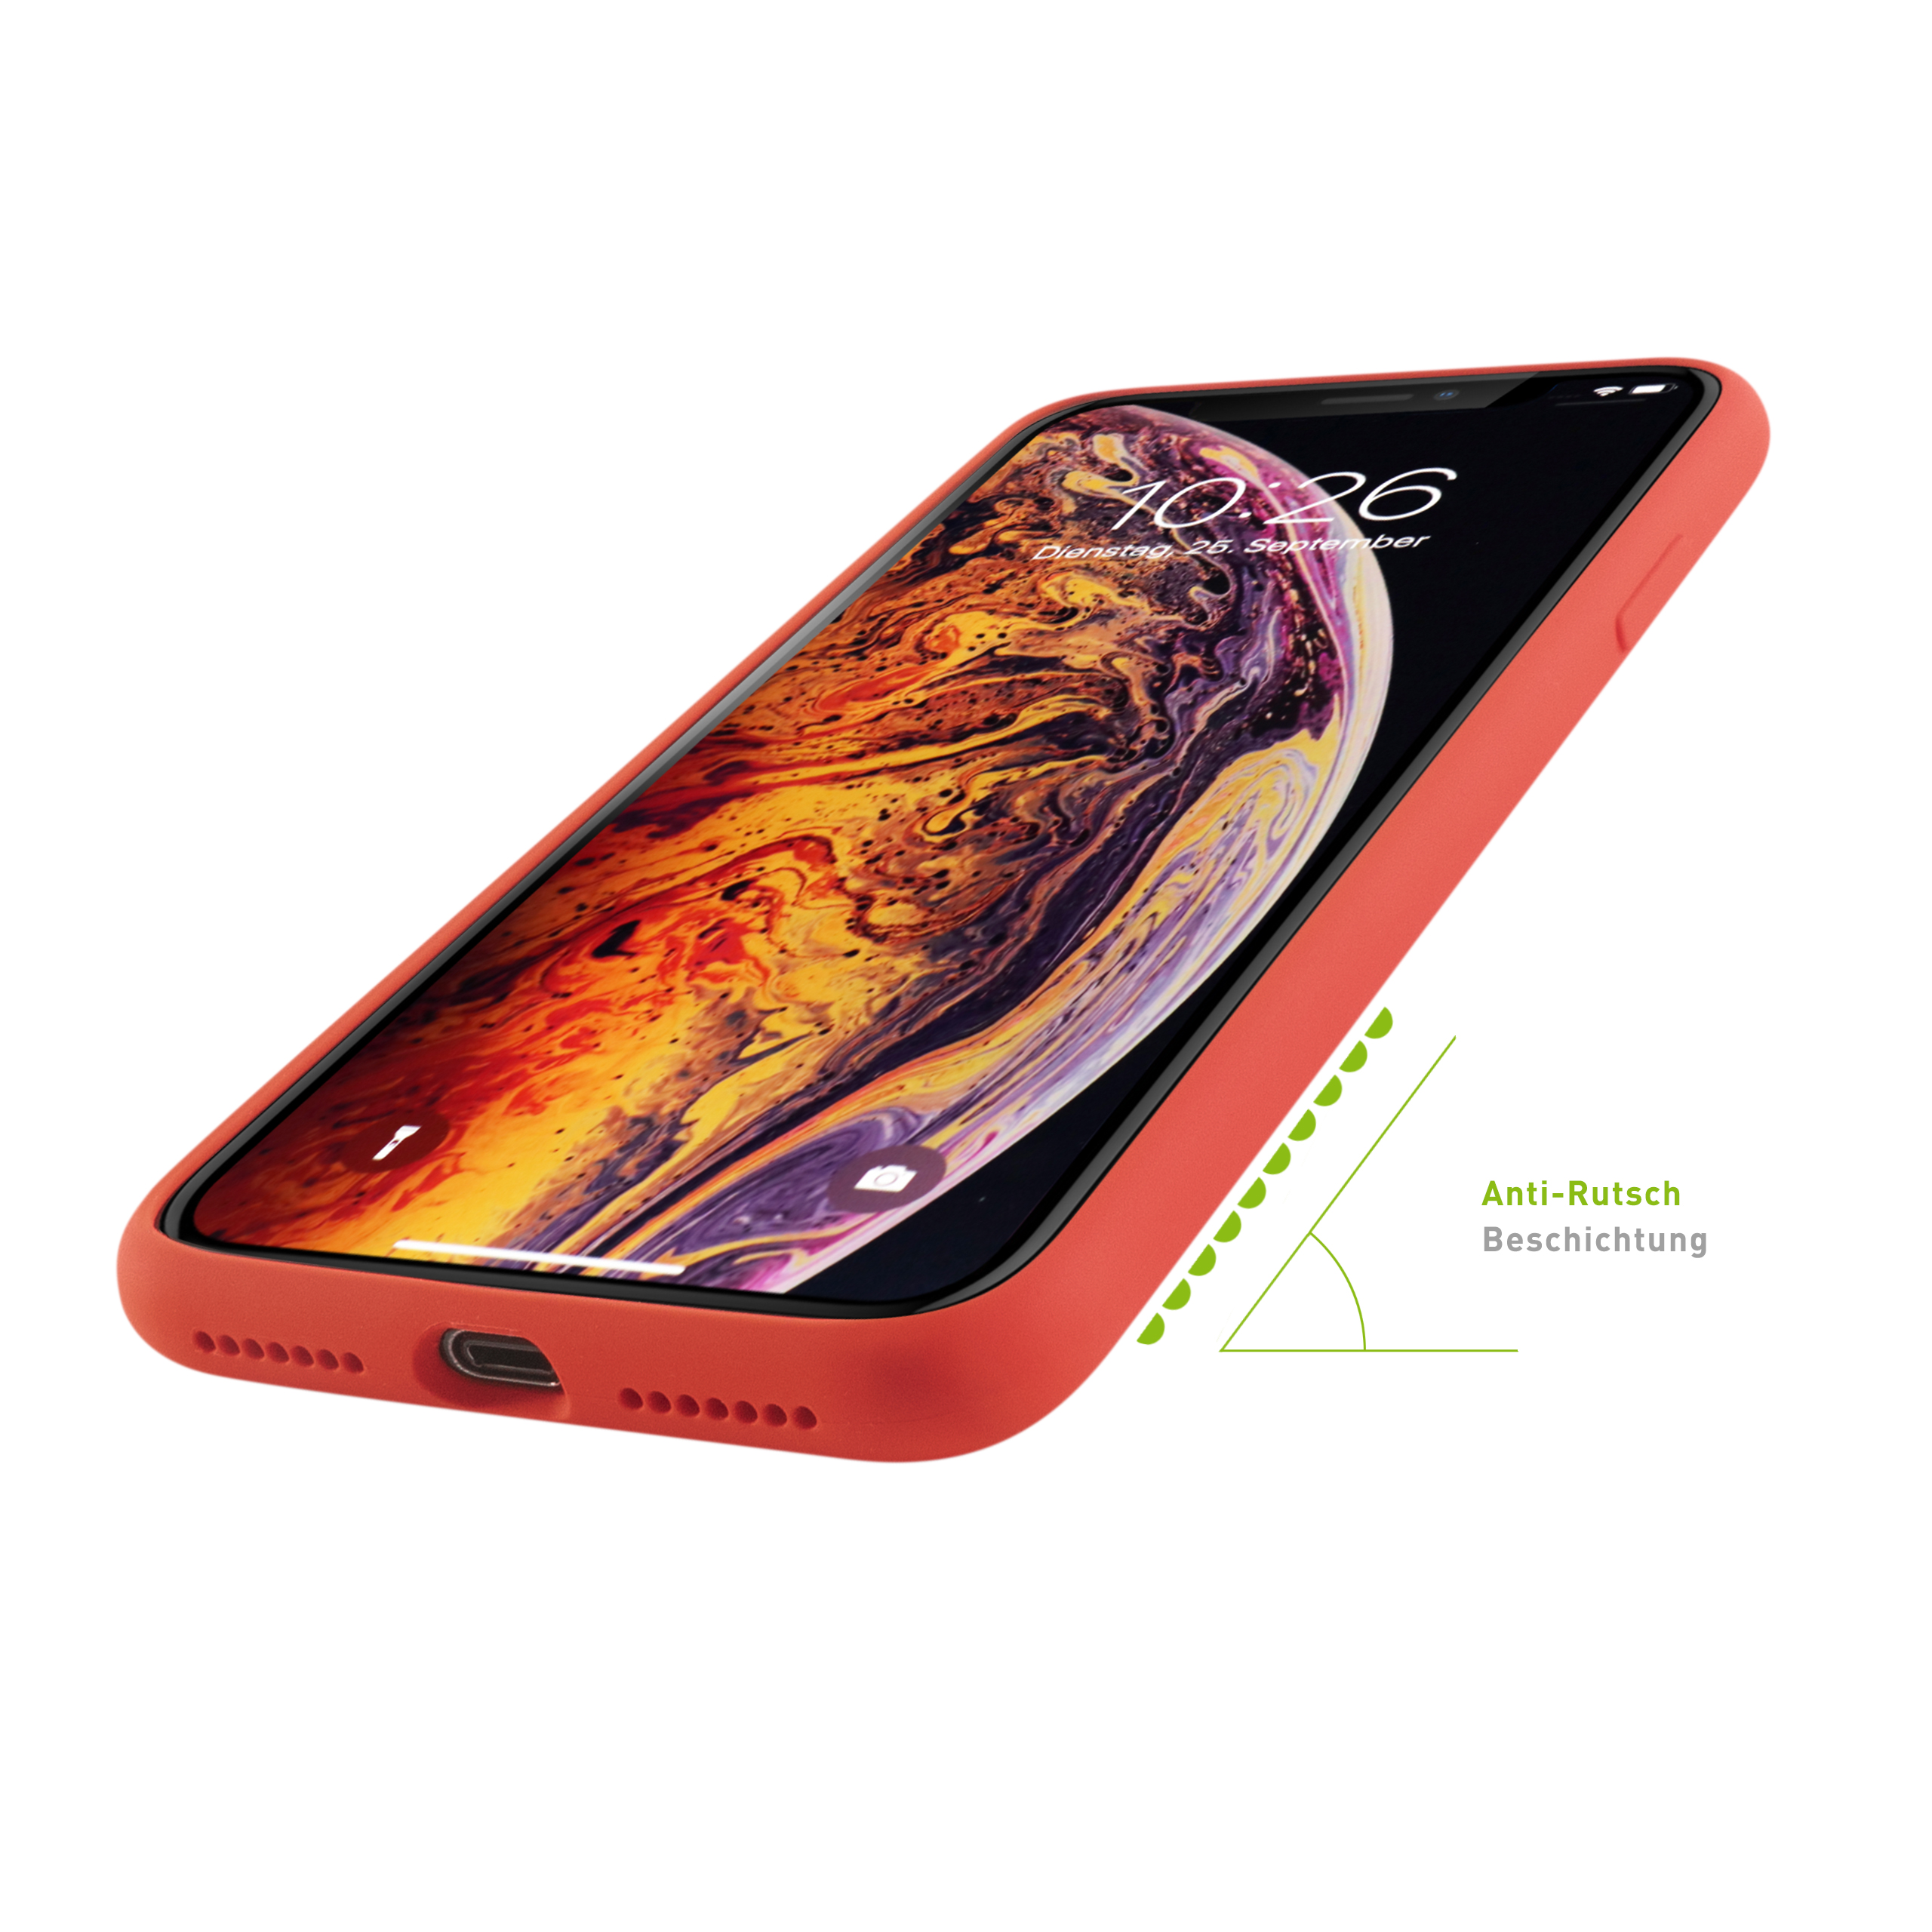 KMP Silikon Schutzhülle Cover, Max, für Full Max iPhone iPhone XS red Red, Apple, XS